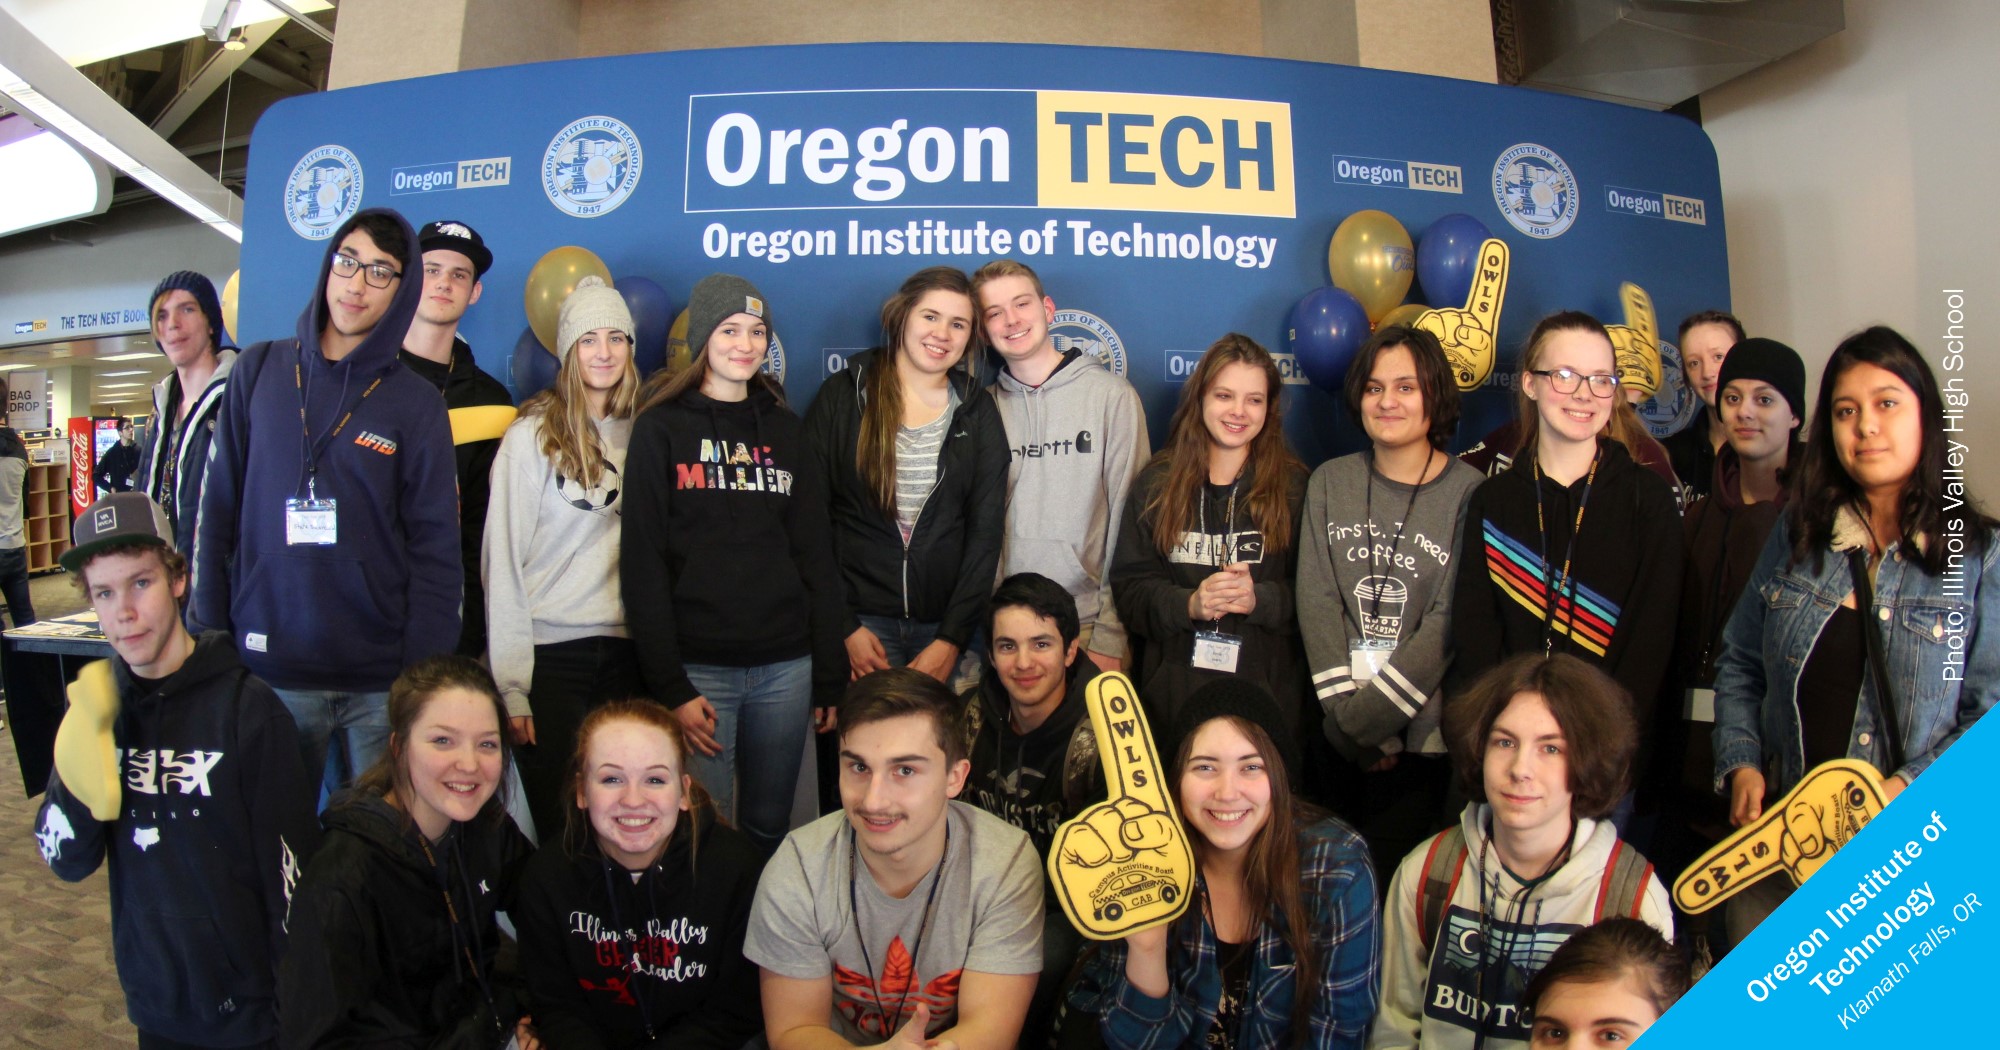 Smiling students from Illinois Valley High school in front of an OIT sign